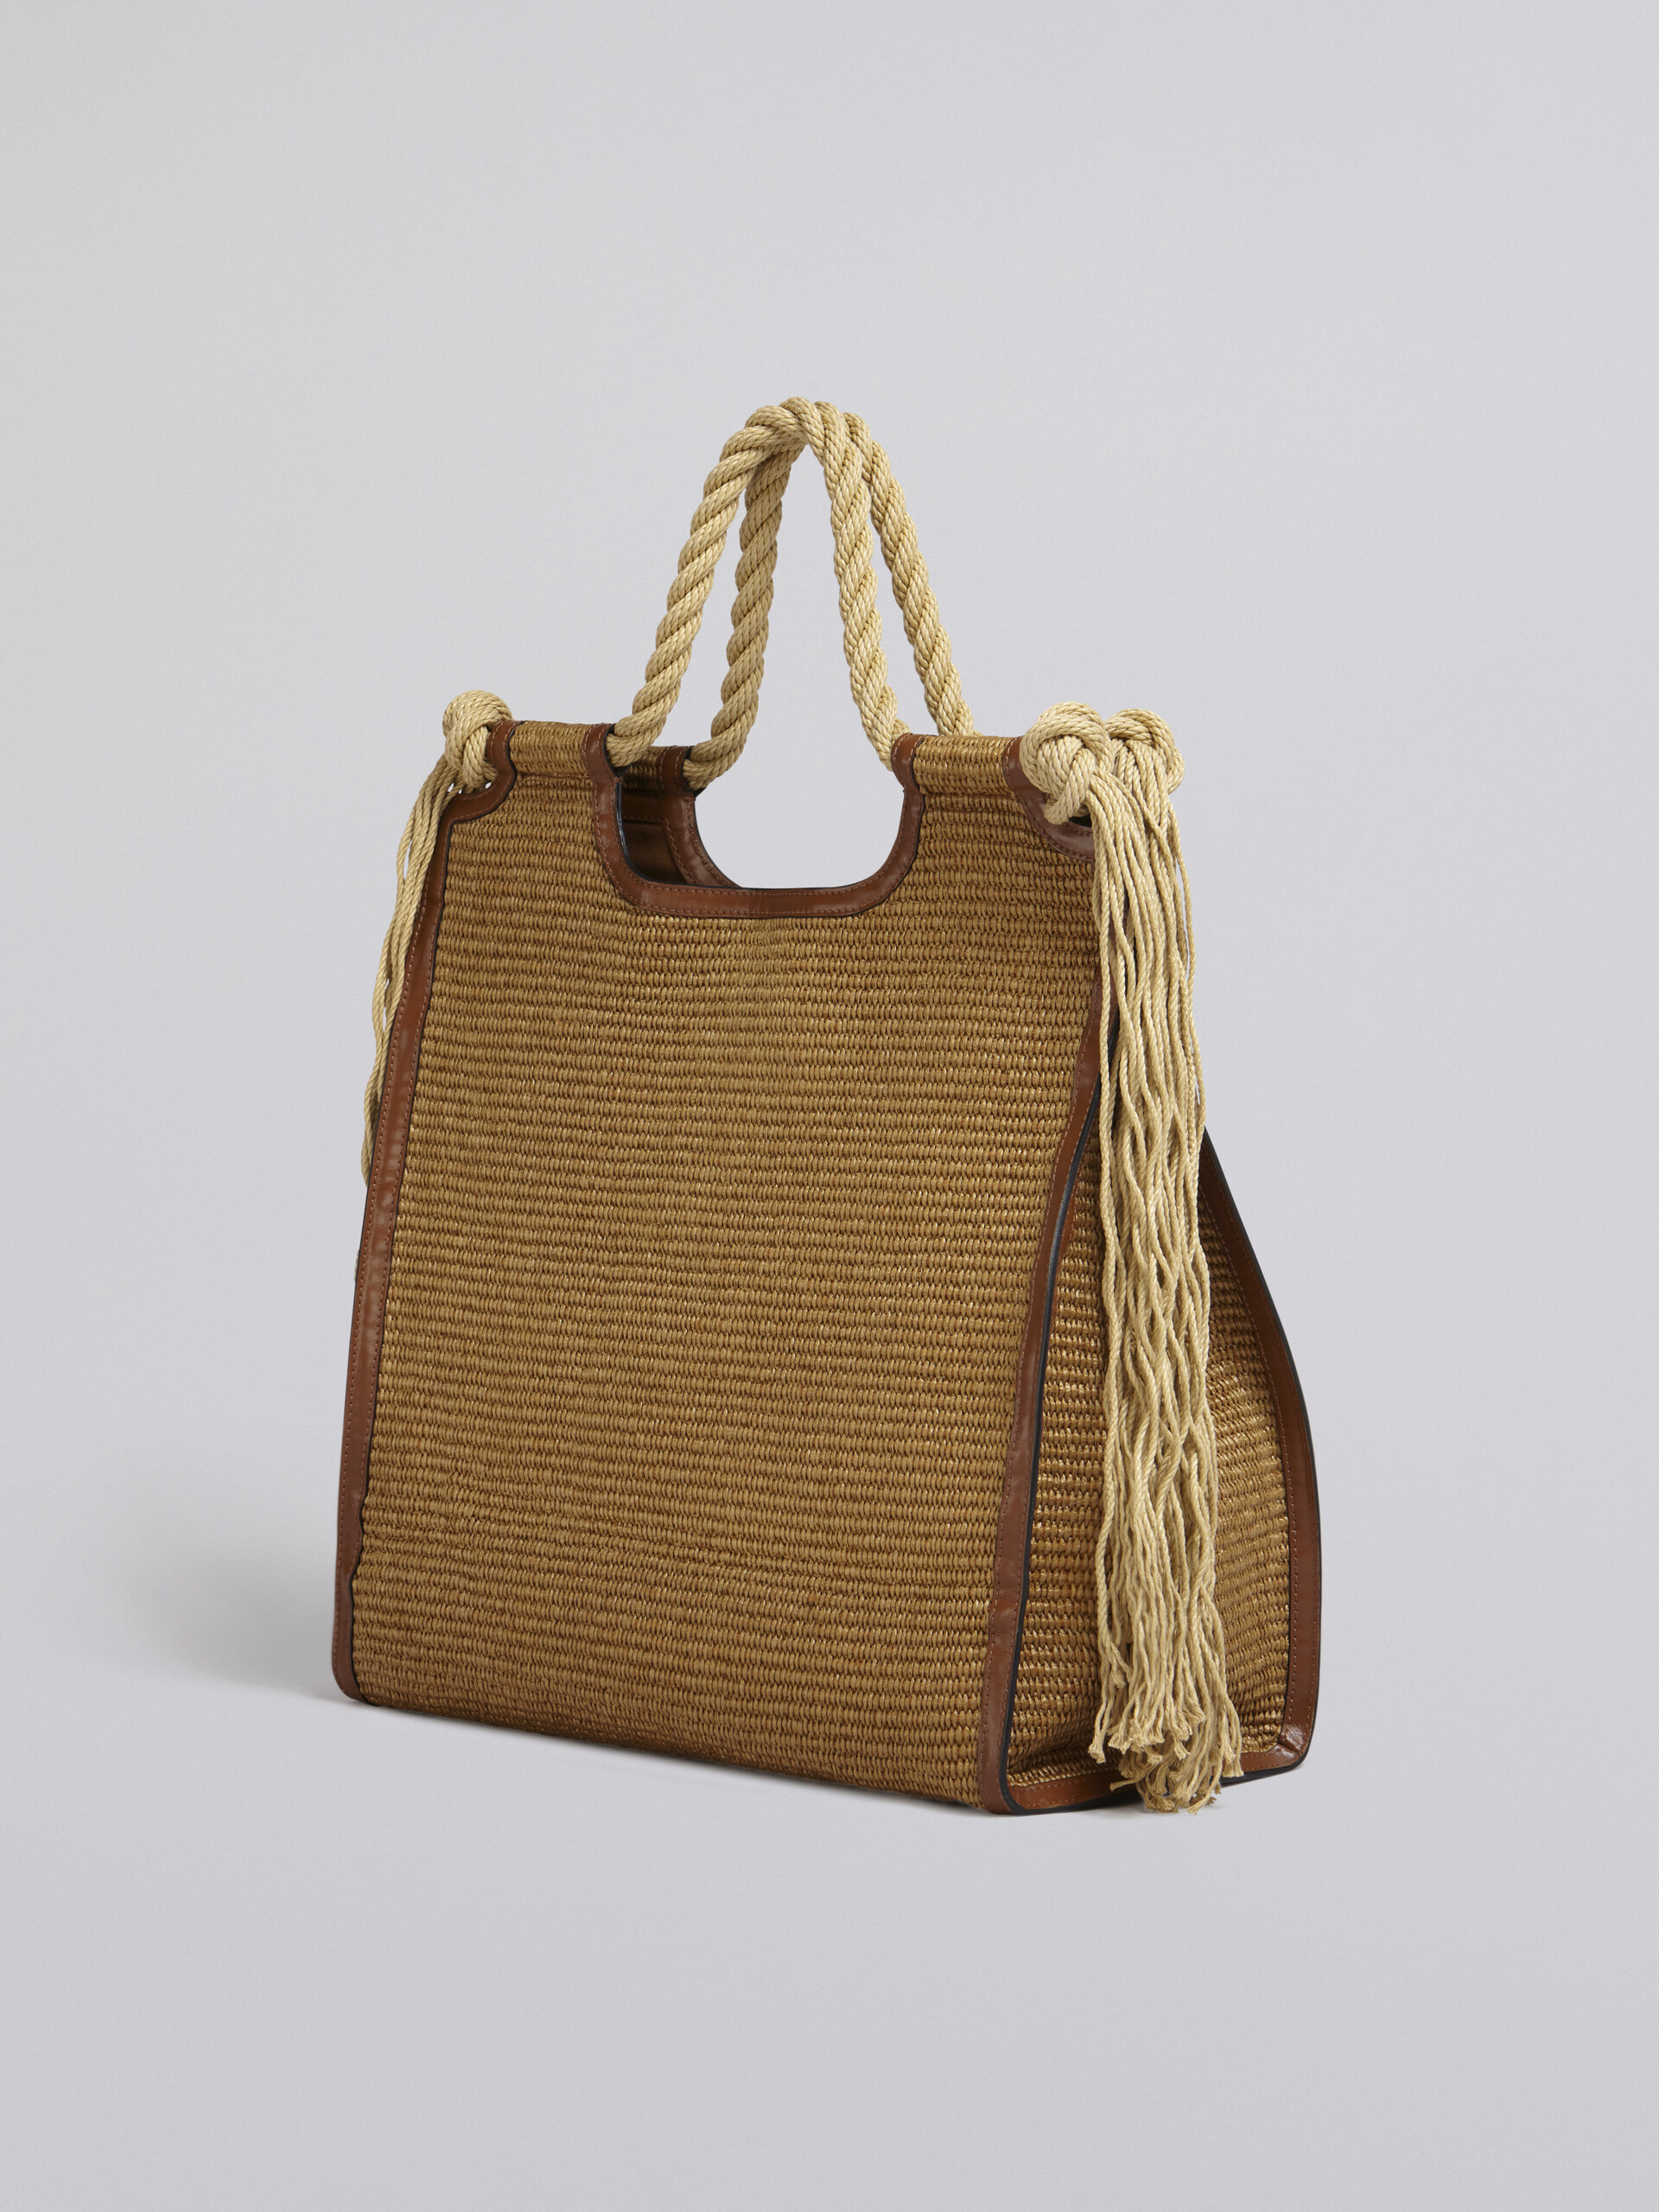 Marcel summer bag in brown leather and raffia with rope handles - Handbags - Image 3